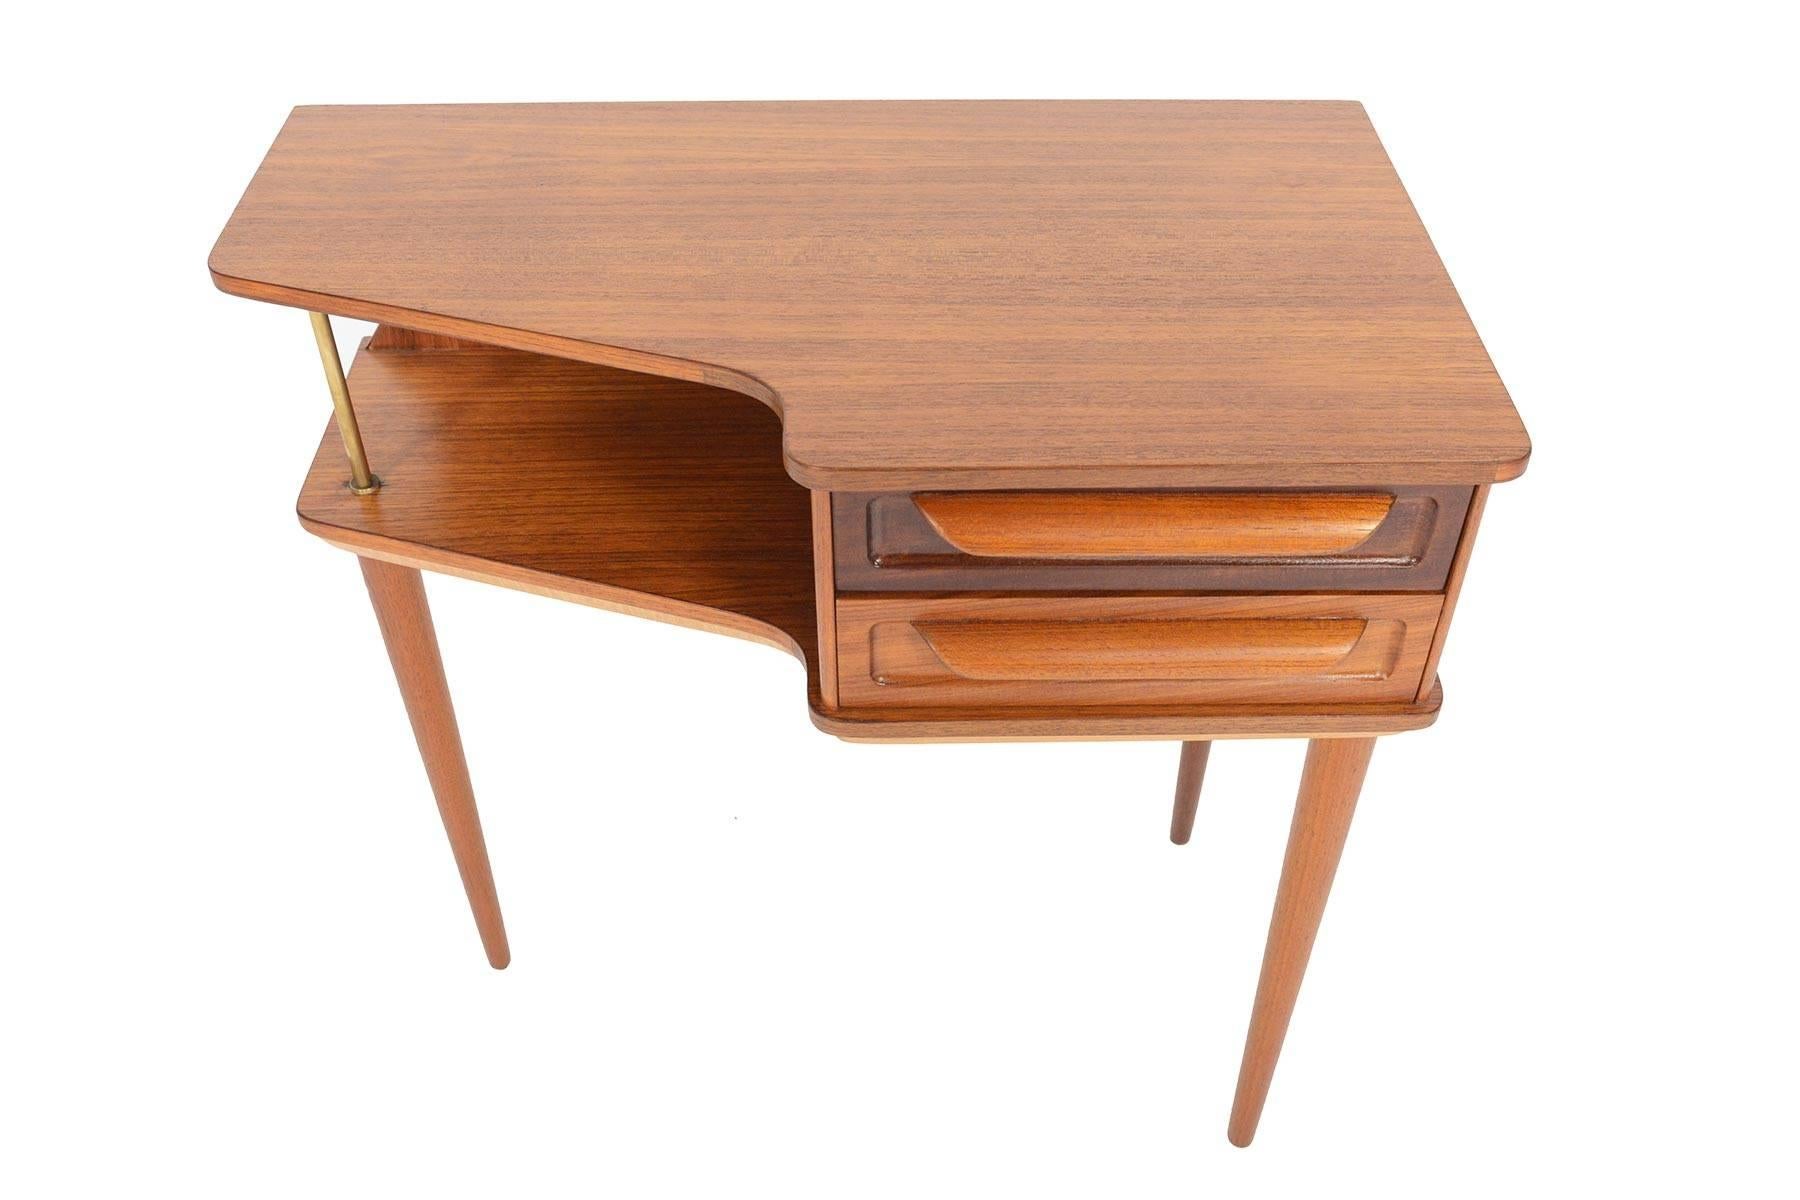 This Danish modern hallway chest offers an unusual design with a dynamic case shape and three leg design. The cabinet houses two drawers with carved pulls. The open cubby is supported by a brass rod. Stunning from every angle, the table top and back